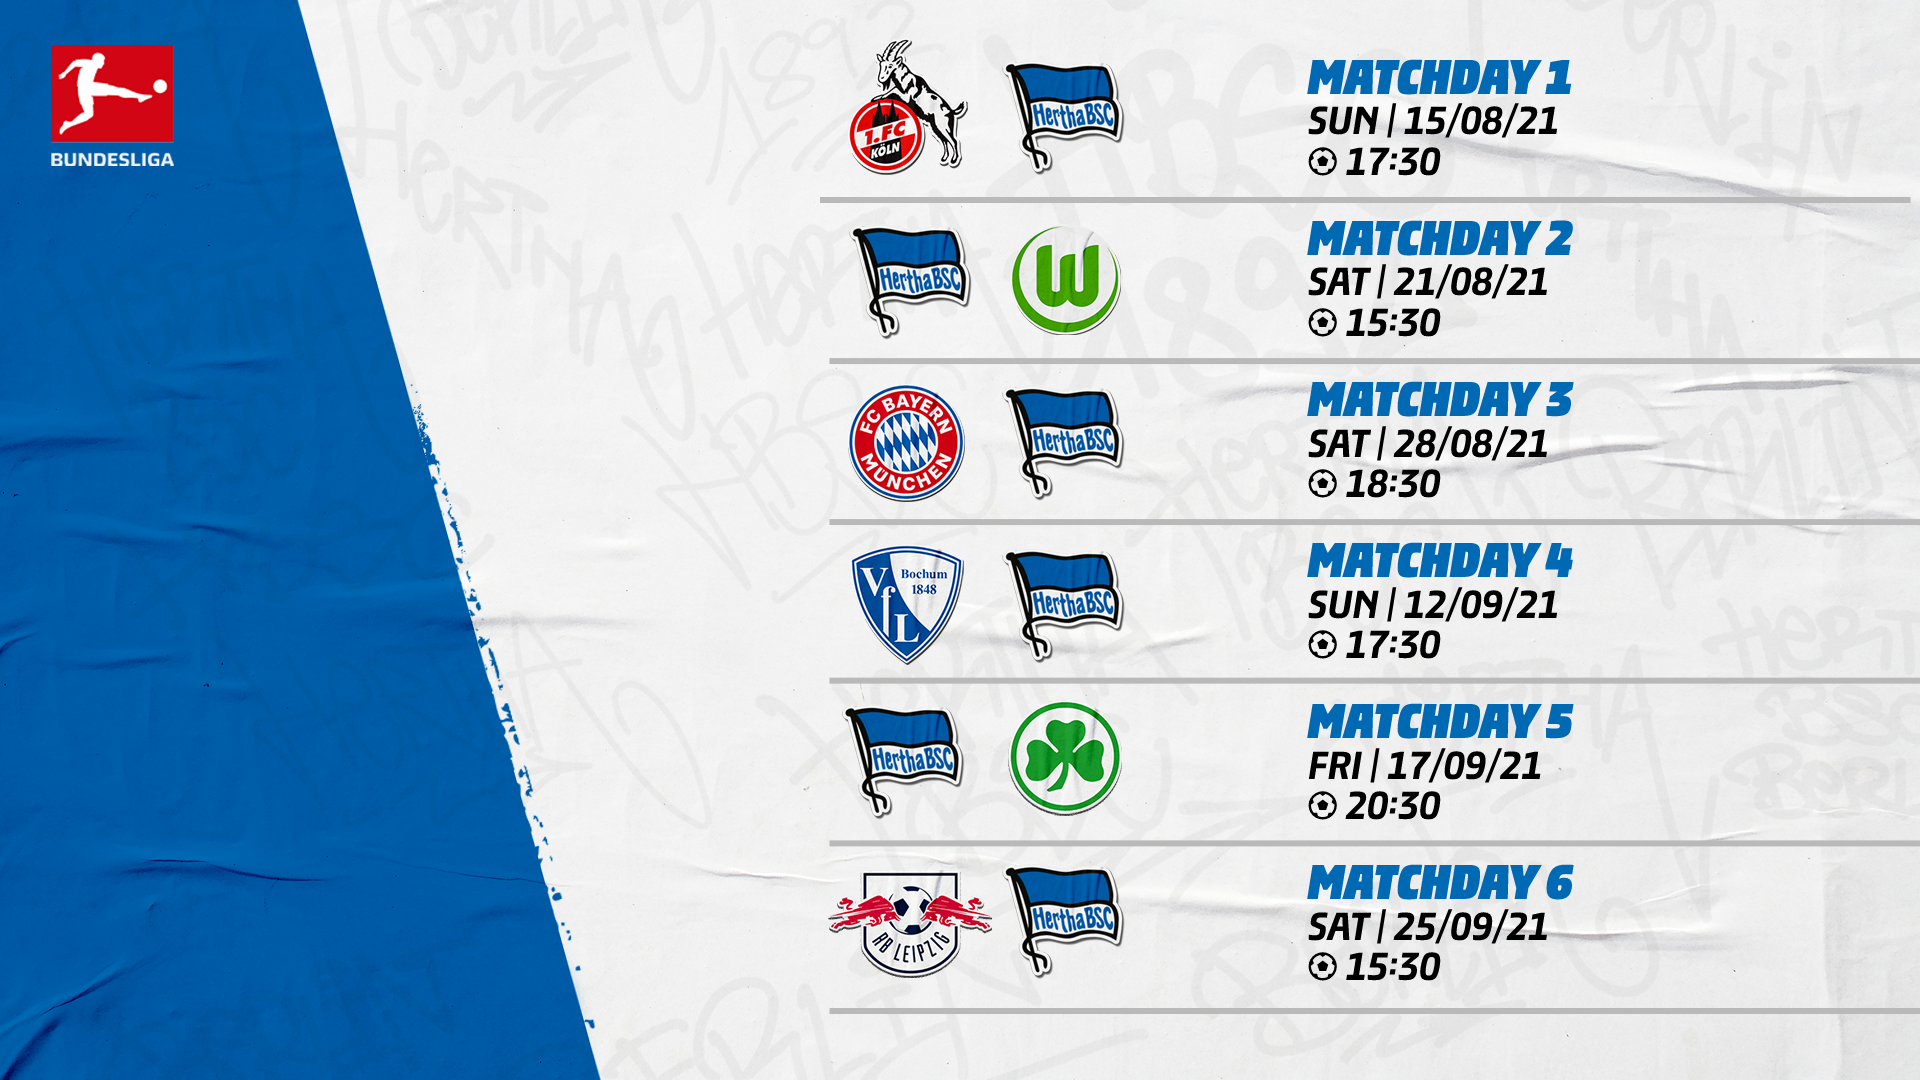 The schedule for the opening six matchdays.